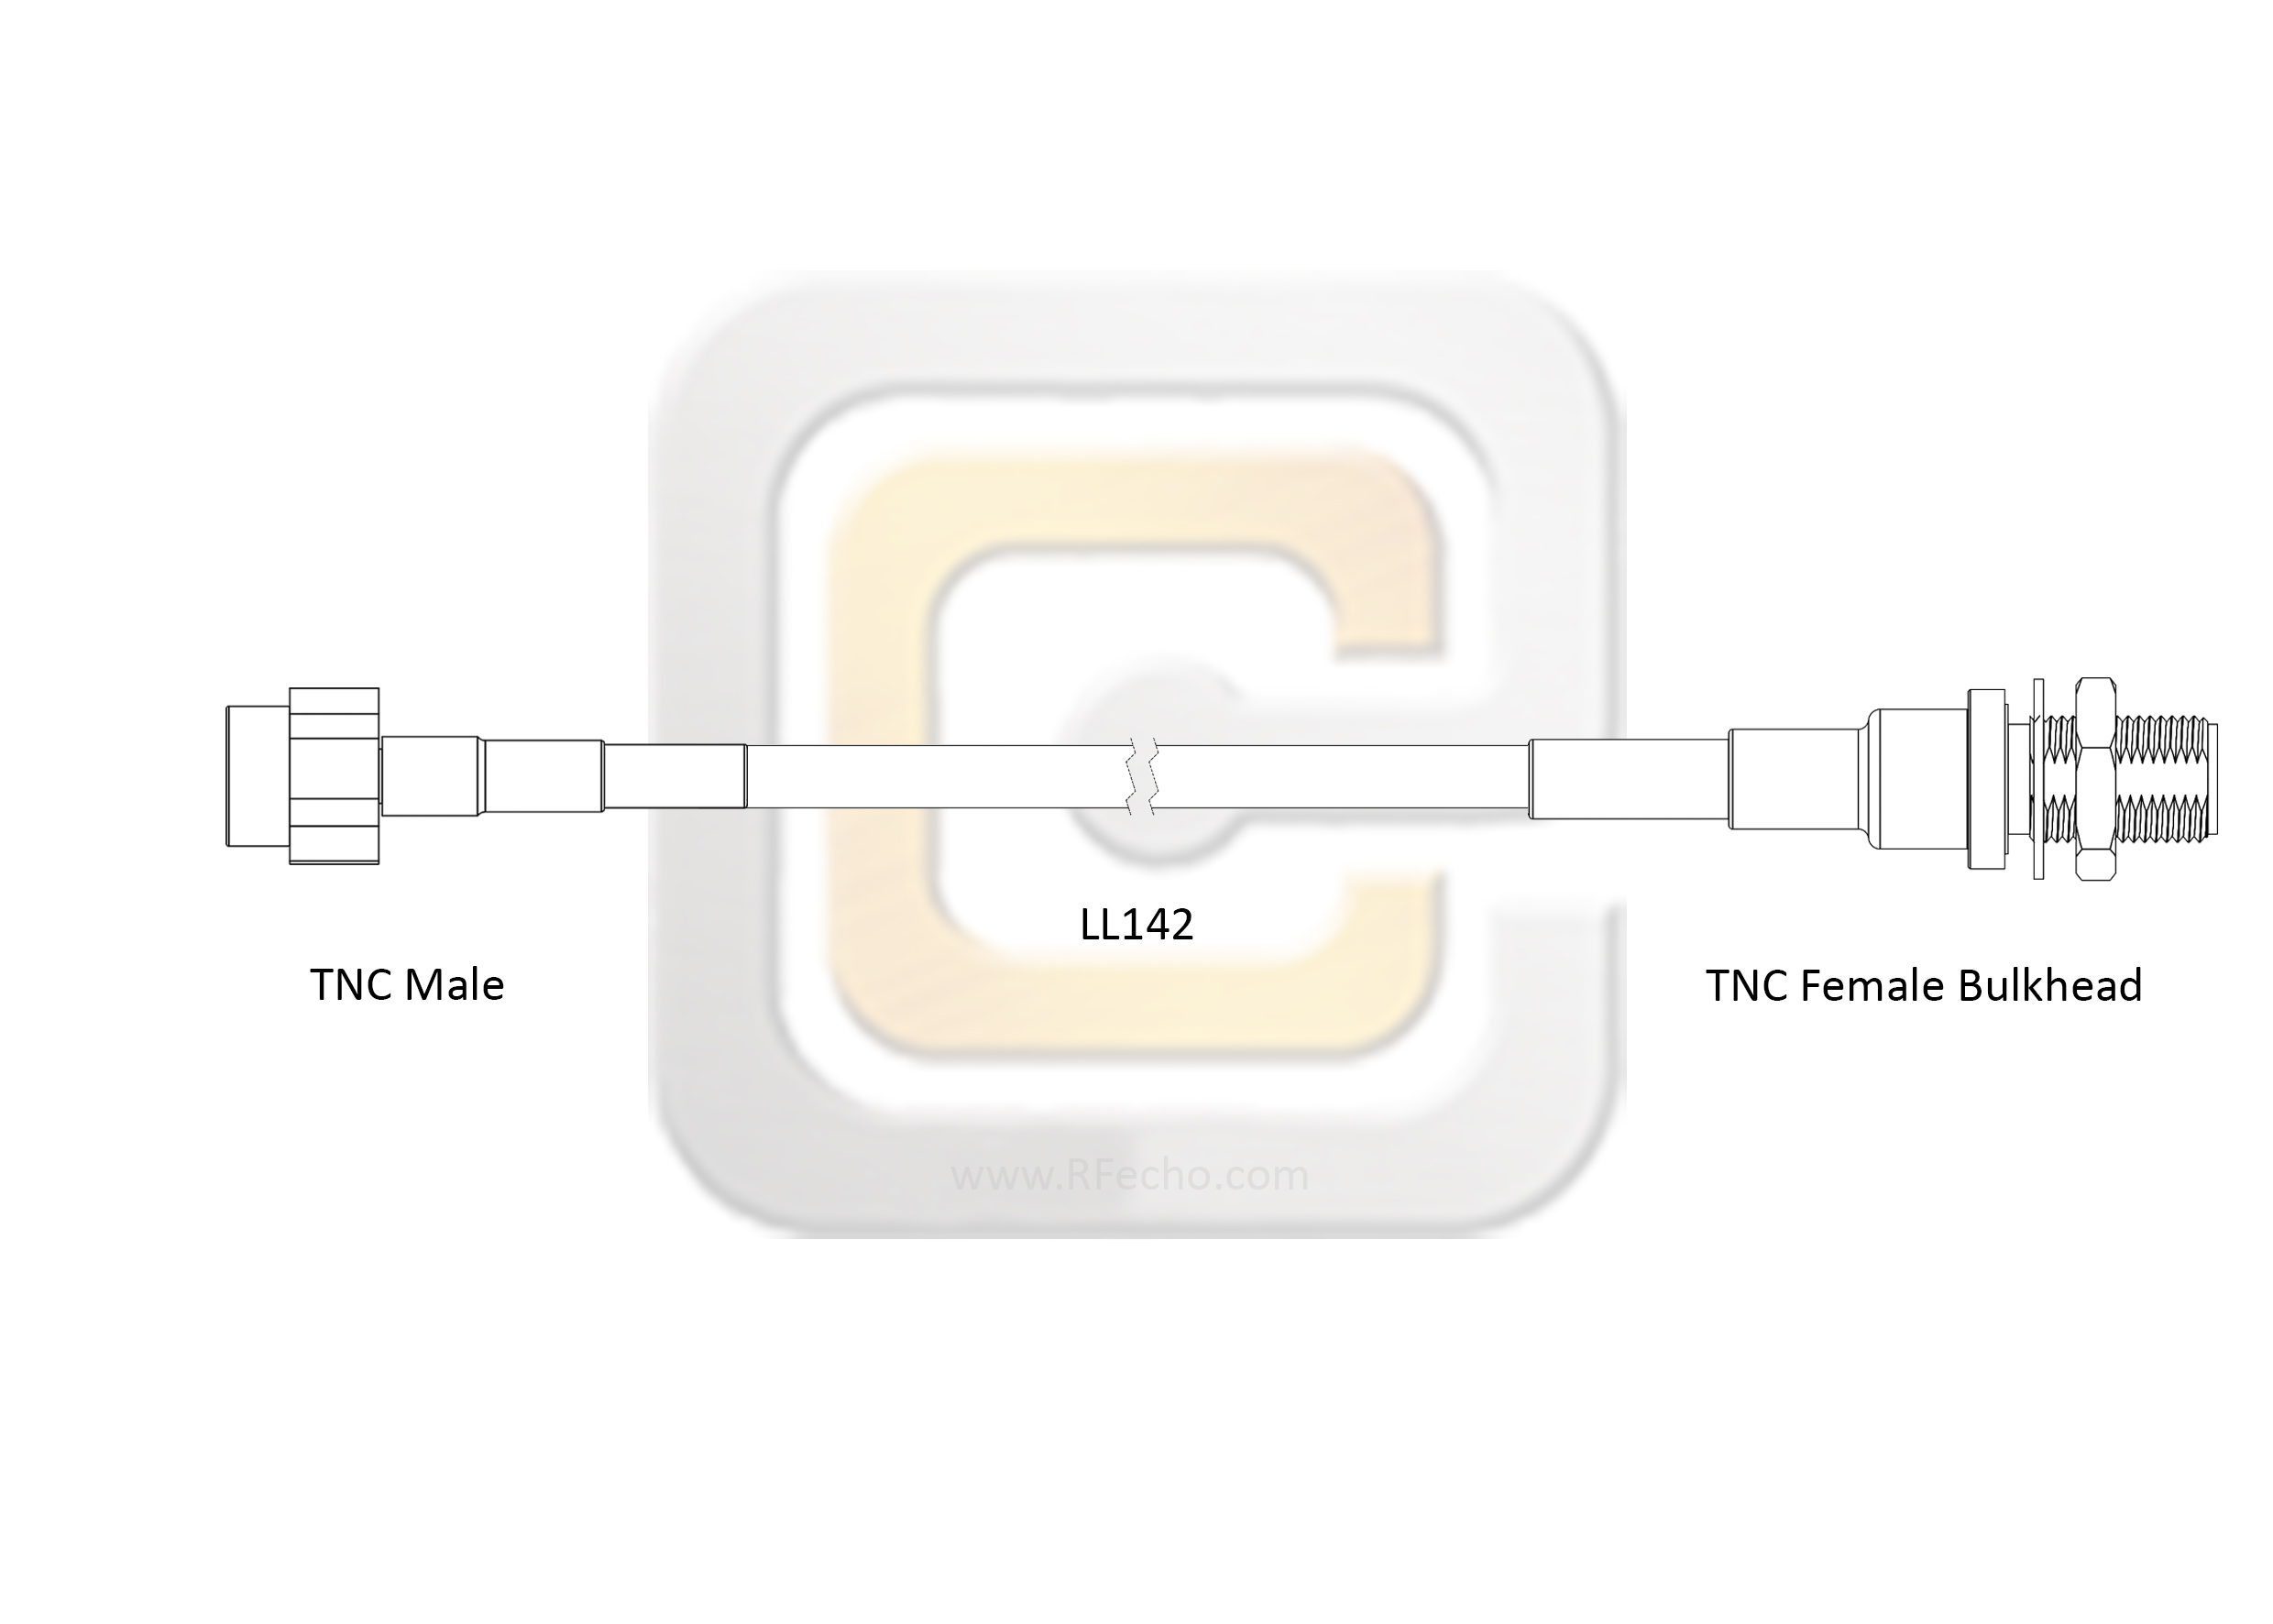 Low Loss TNC Male to TNC Female Bulkhead, 11 GHz,  LL142 Coax and RoHS